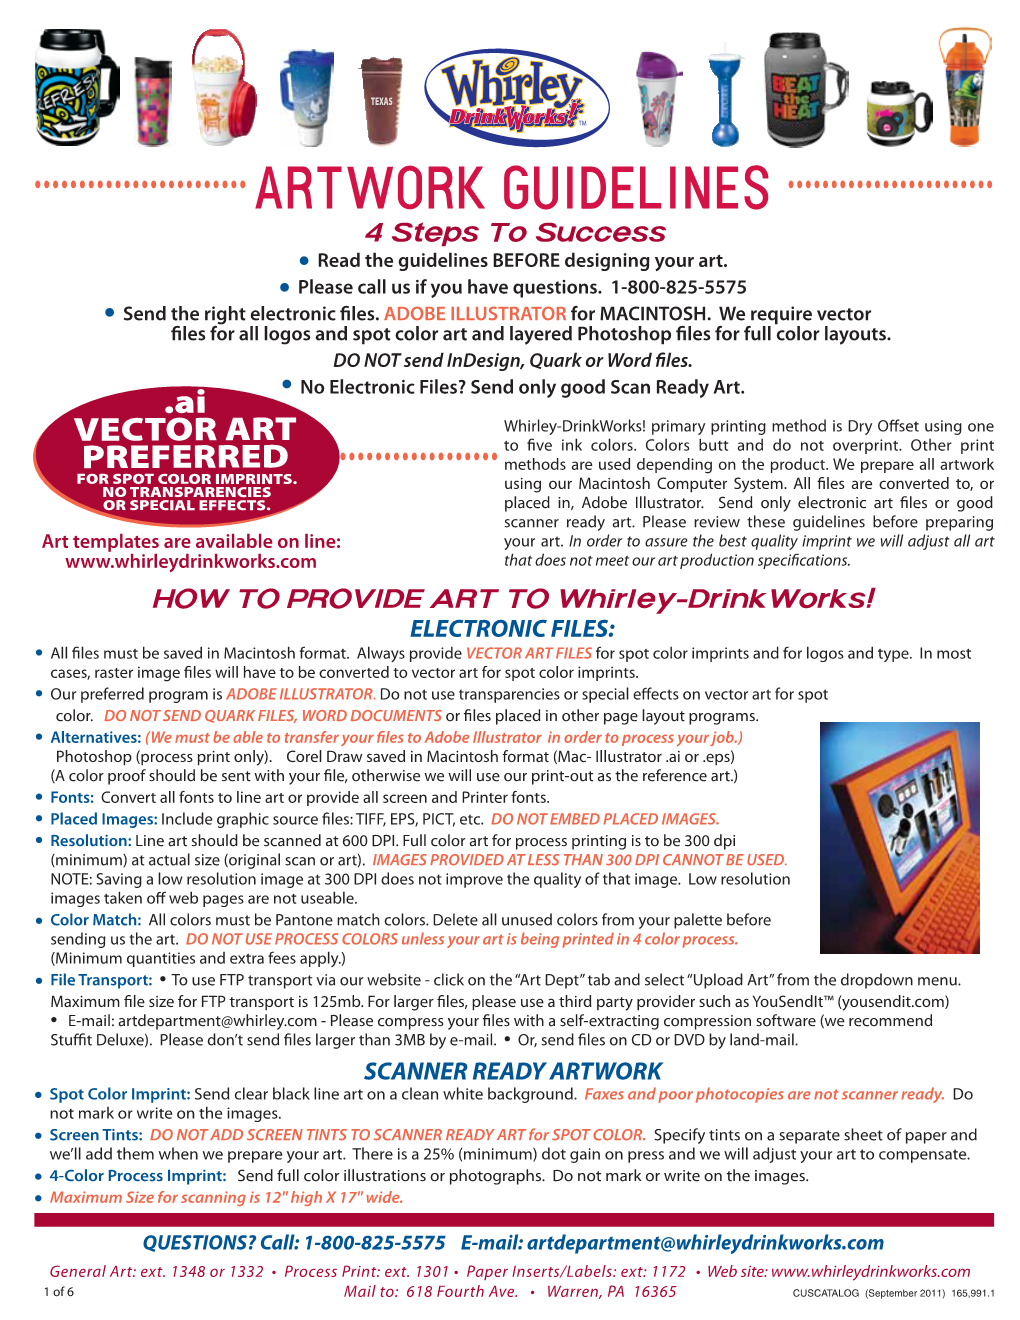 ARTWORK GUIDELINES •••••••••••••••••••••••• 4 Steps to Success • Read the Guidelines BEFORE Designing Your Art